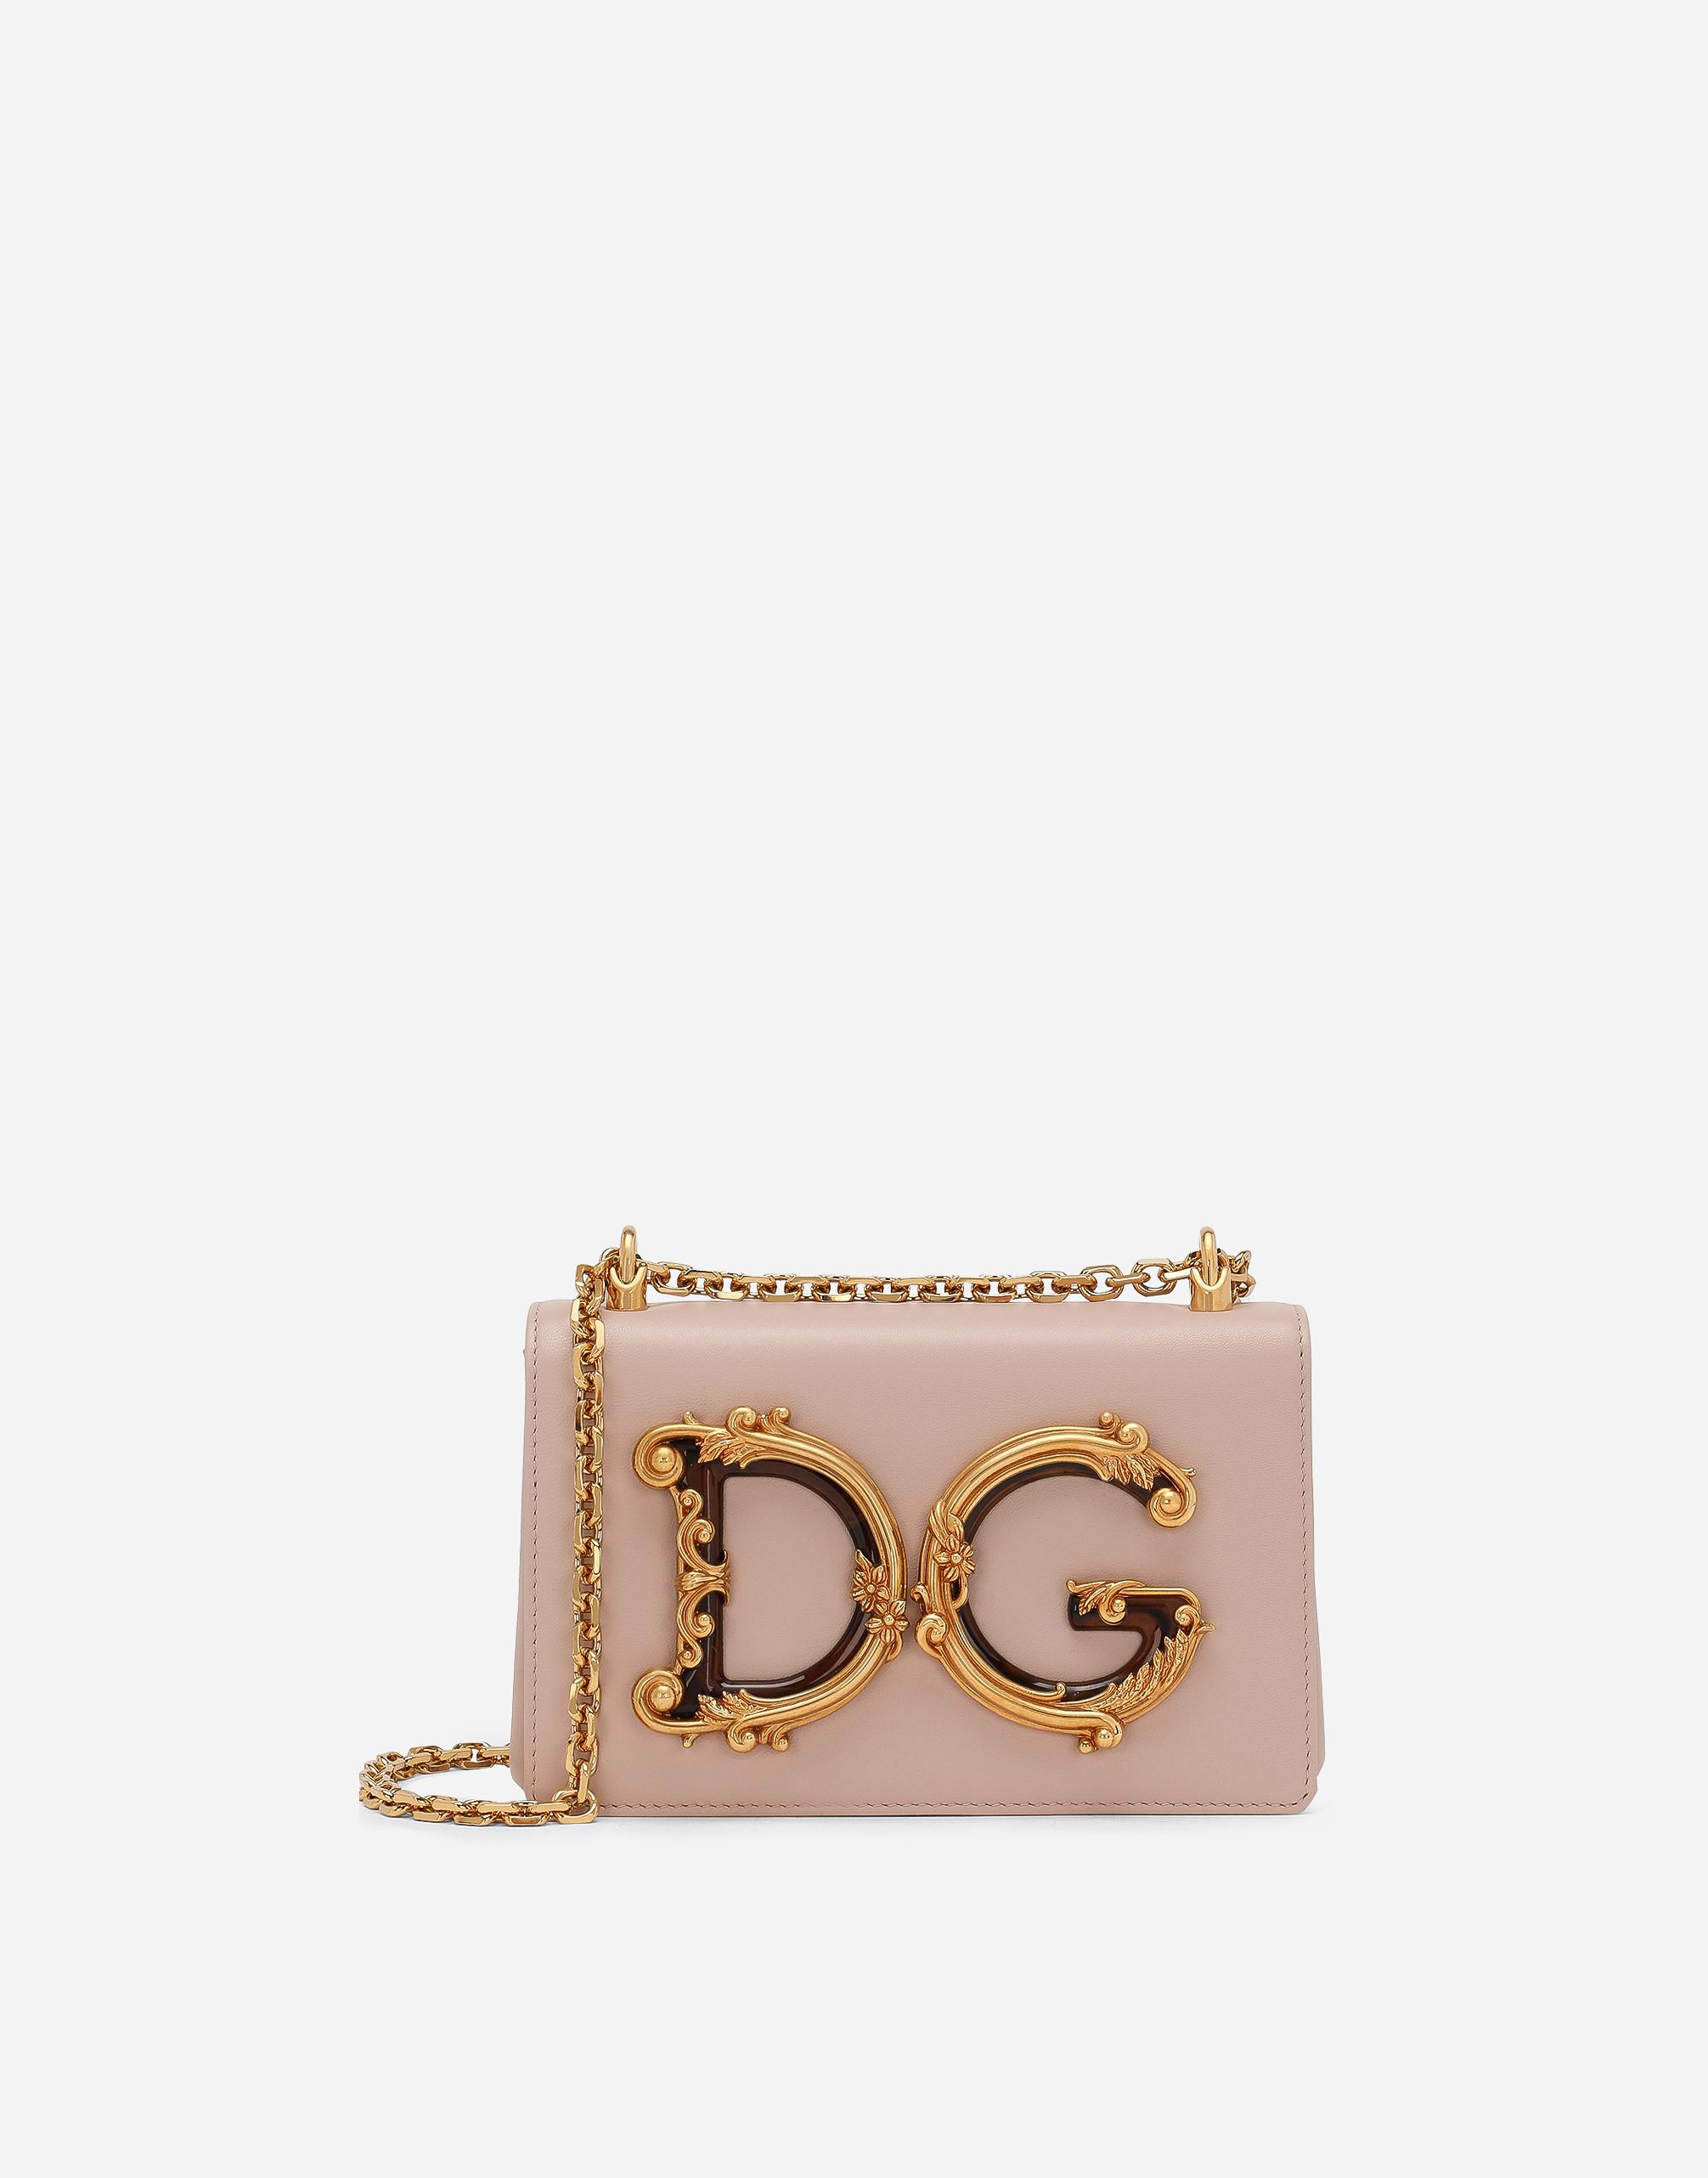 Nappa leather DG Girls bag in Pale Pink